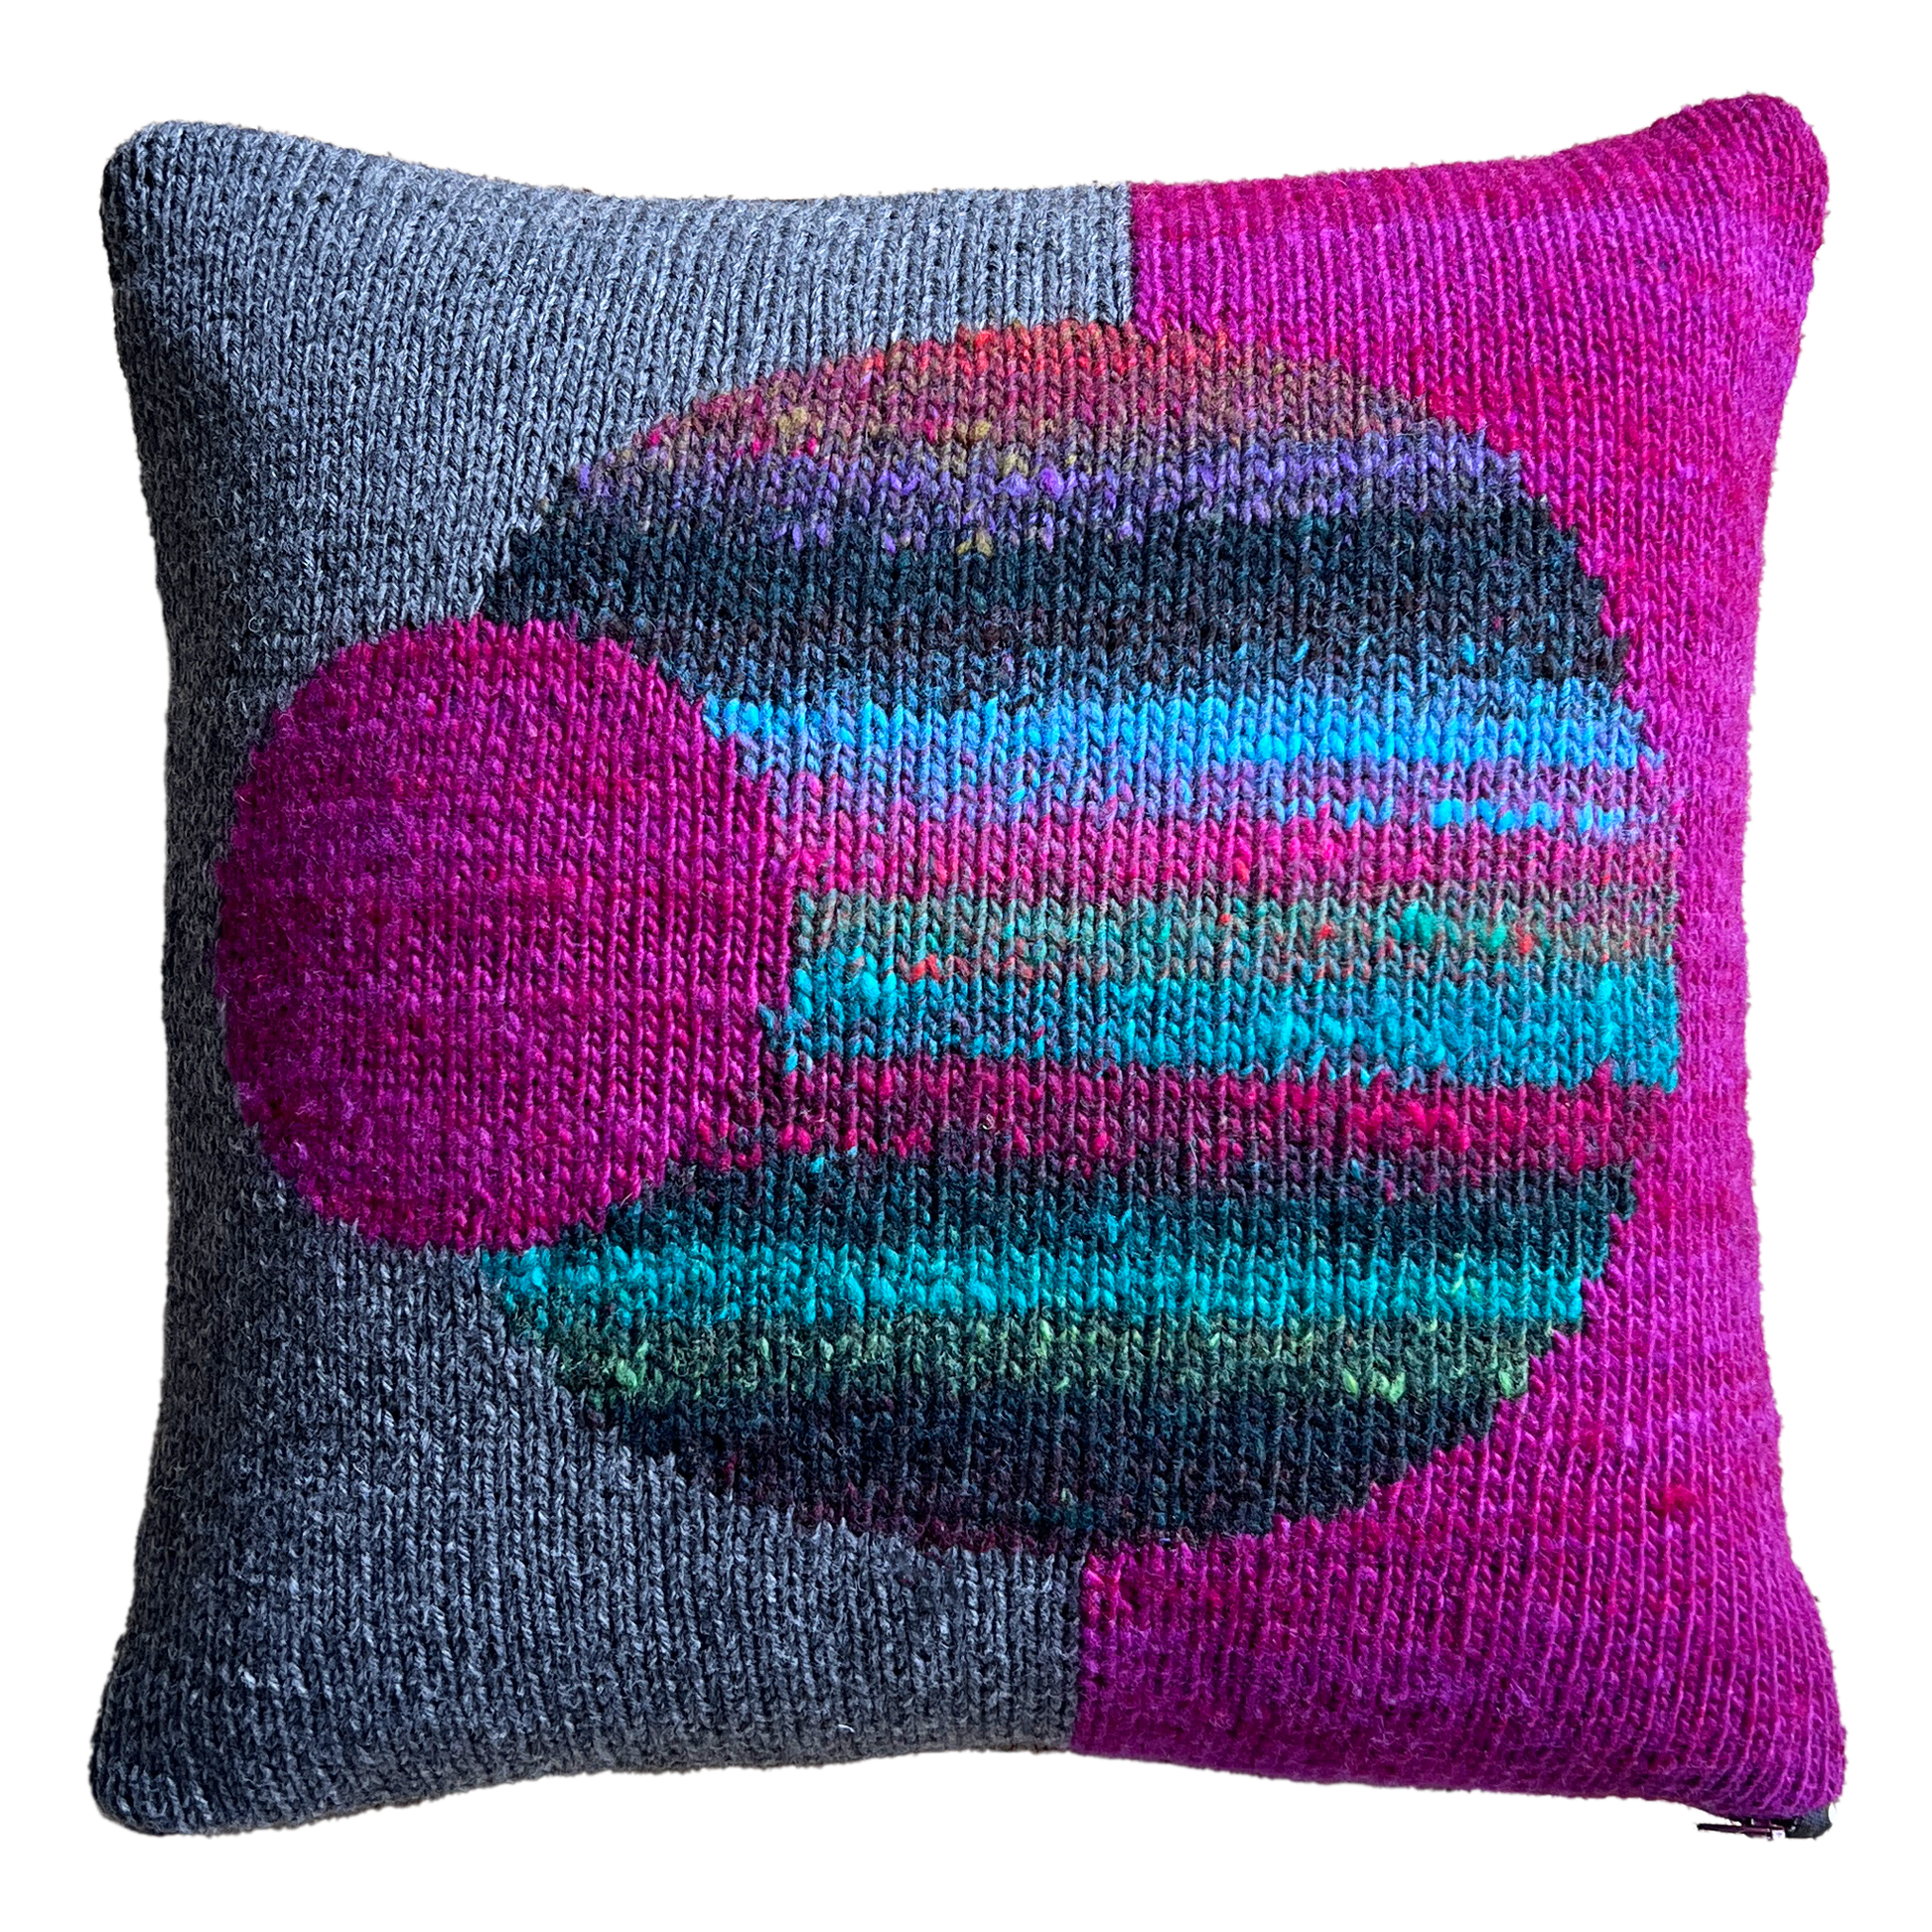 The hand-knit side of this pillow features a split background of charcoal gray (left) and magenta (right), punctuated by a large multicolored, striped sphere in the center and a smaller magenta sphere, off-centered.